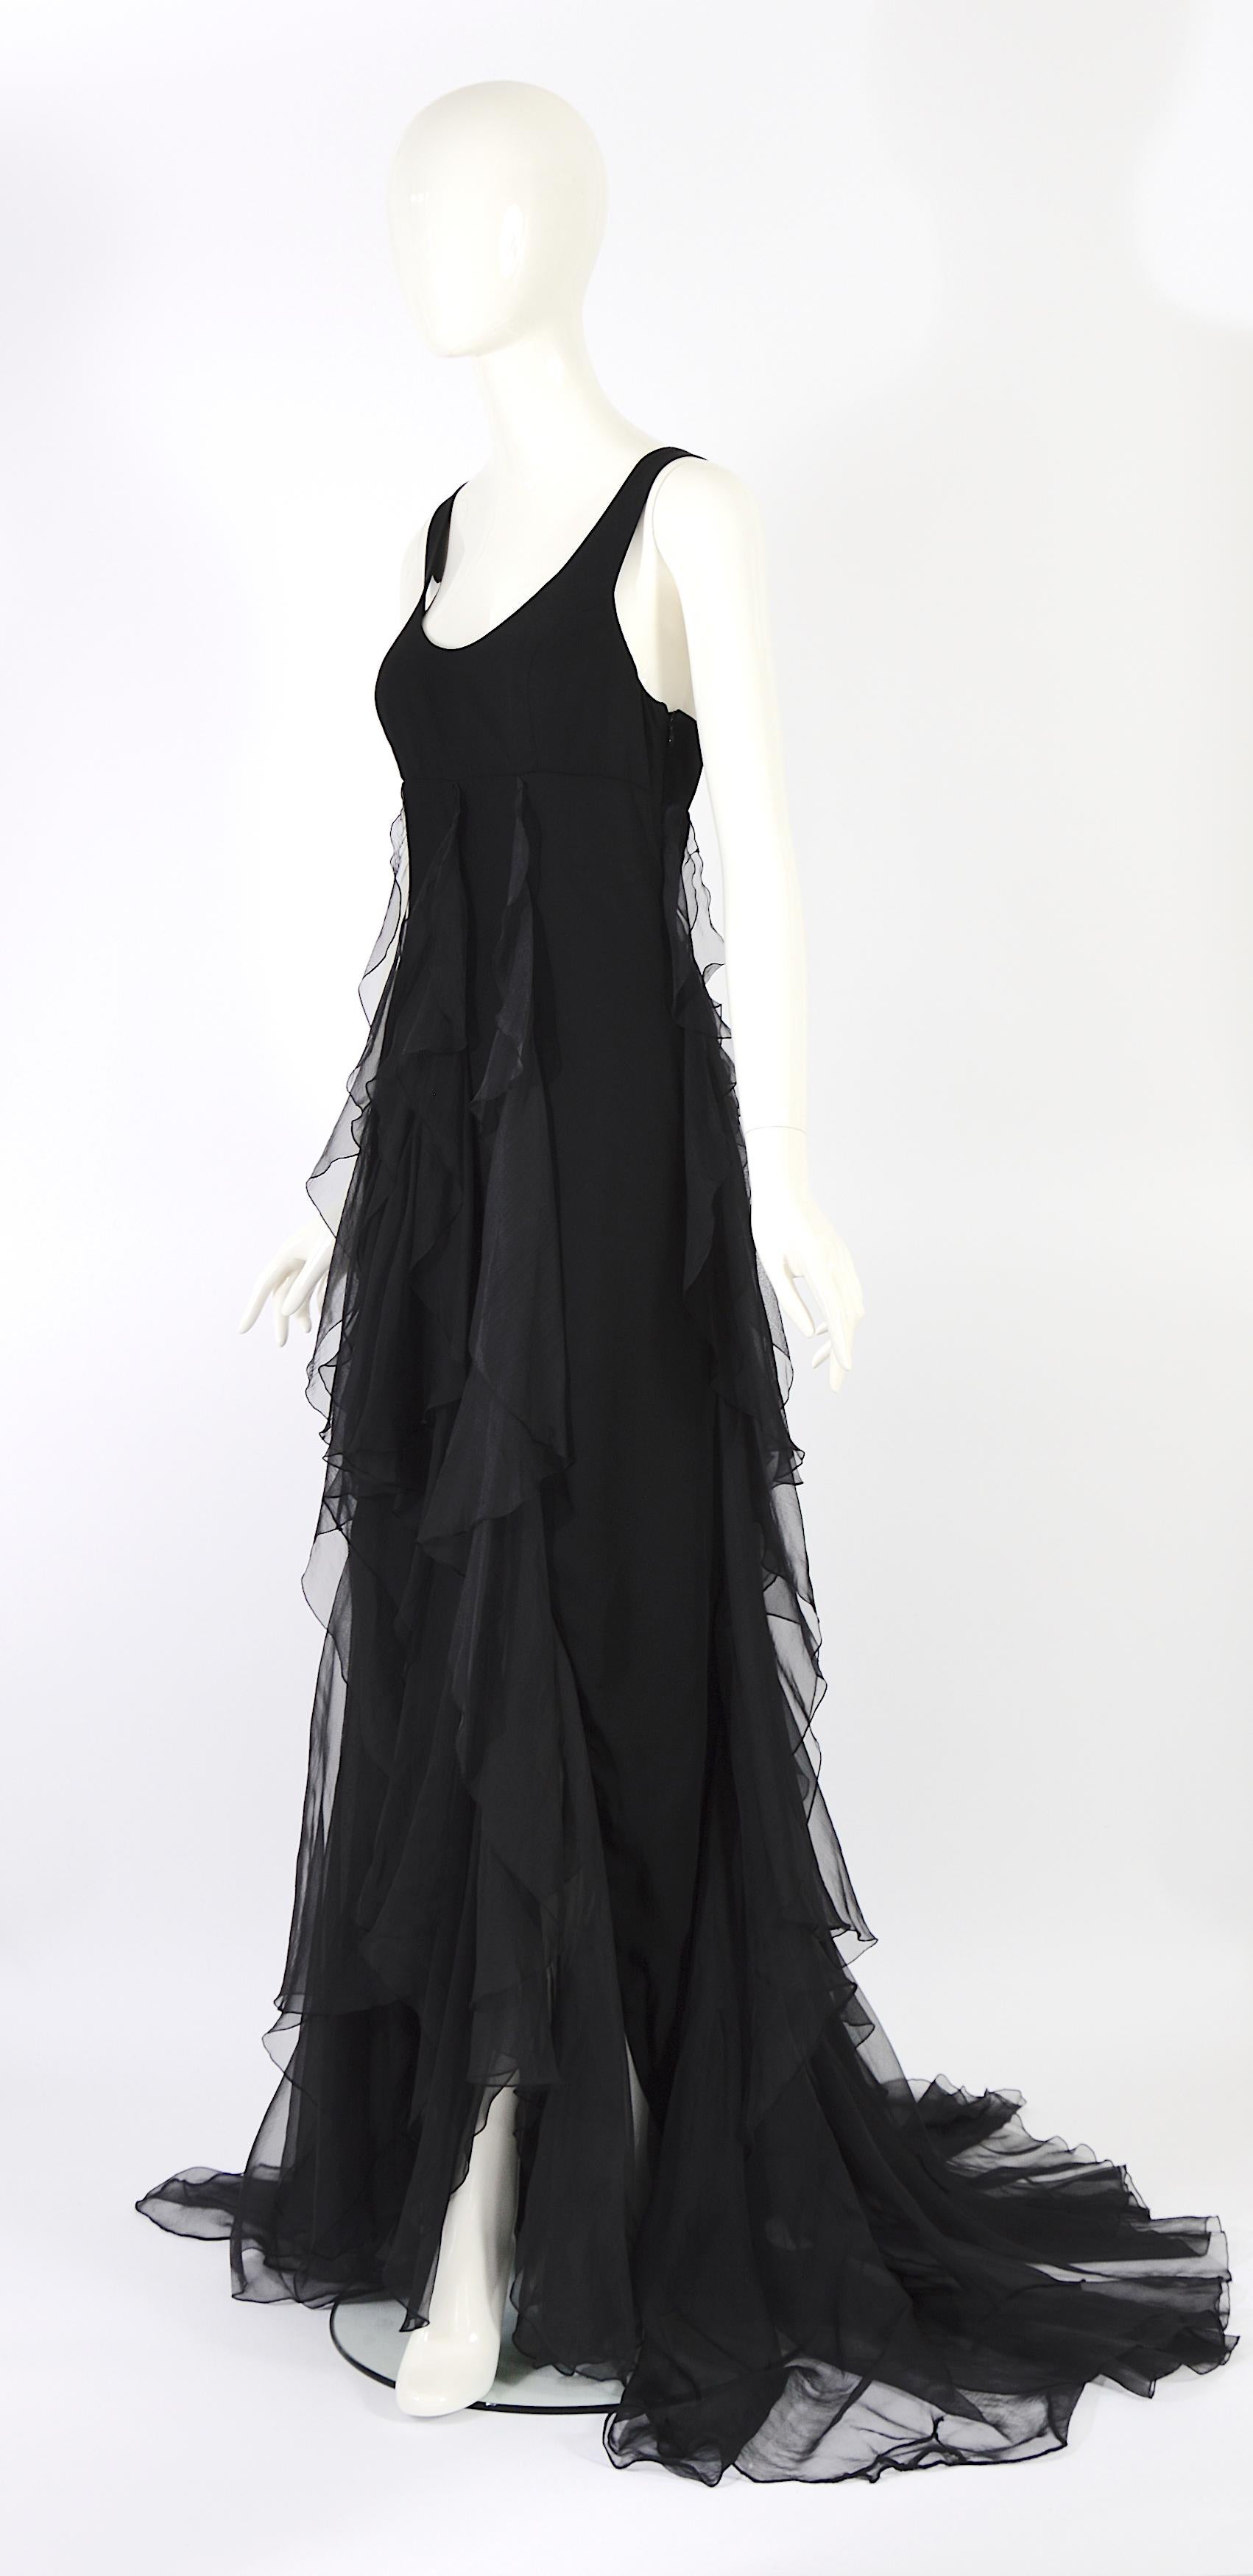 Christian Dior by Gianfranco Ferre S/S 1994 vintage black silk evening dress In Good Condition For Sale In Antwerp, BE